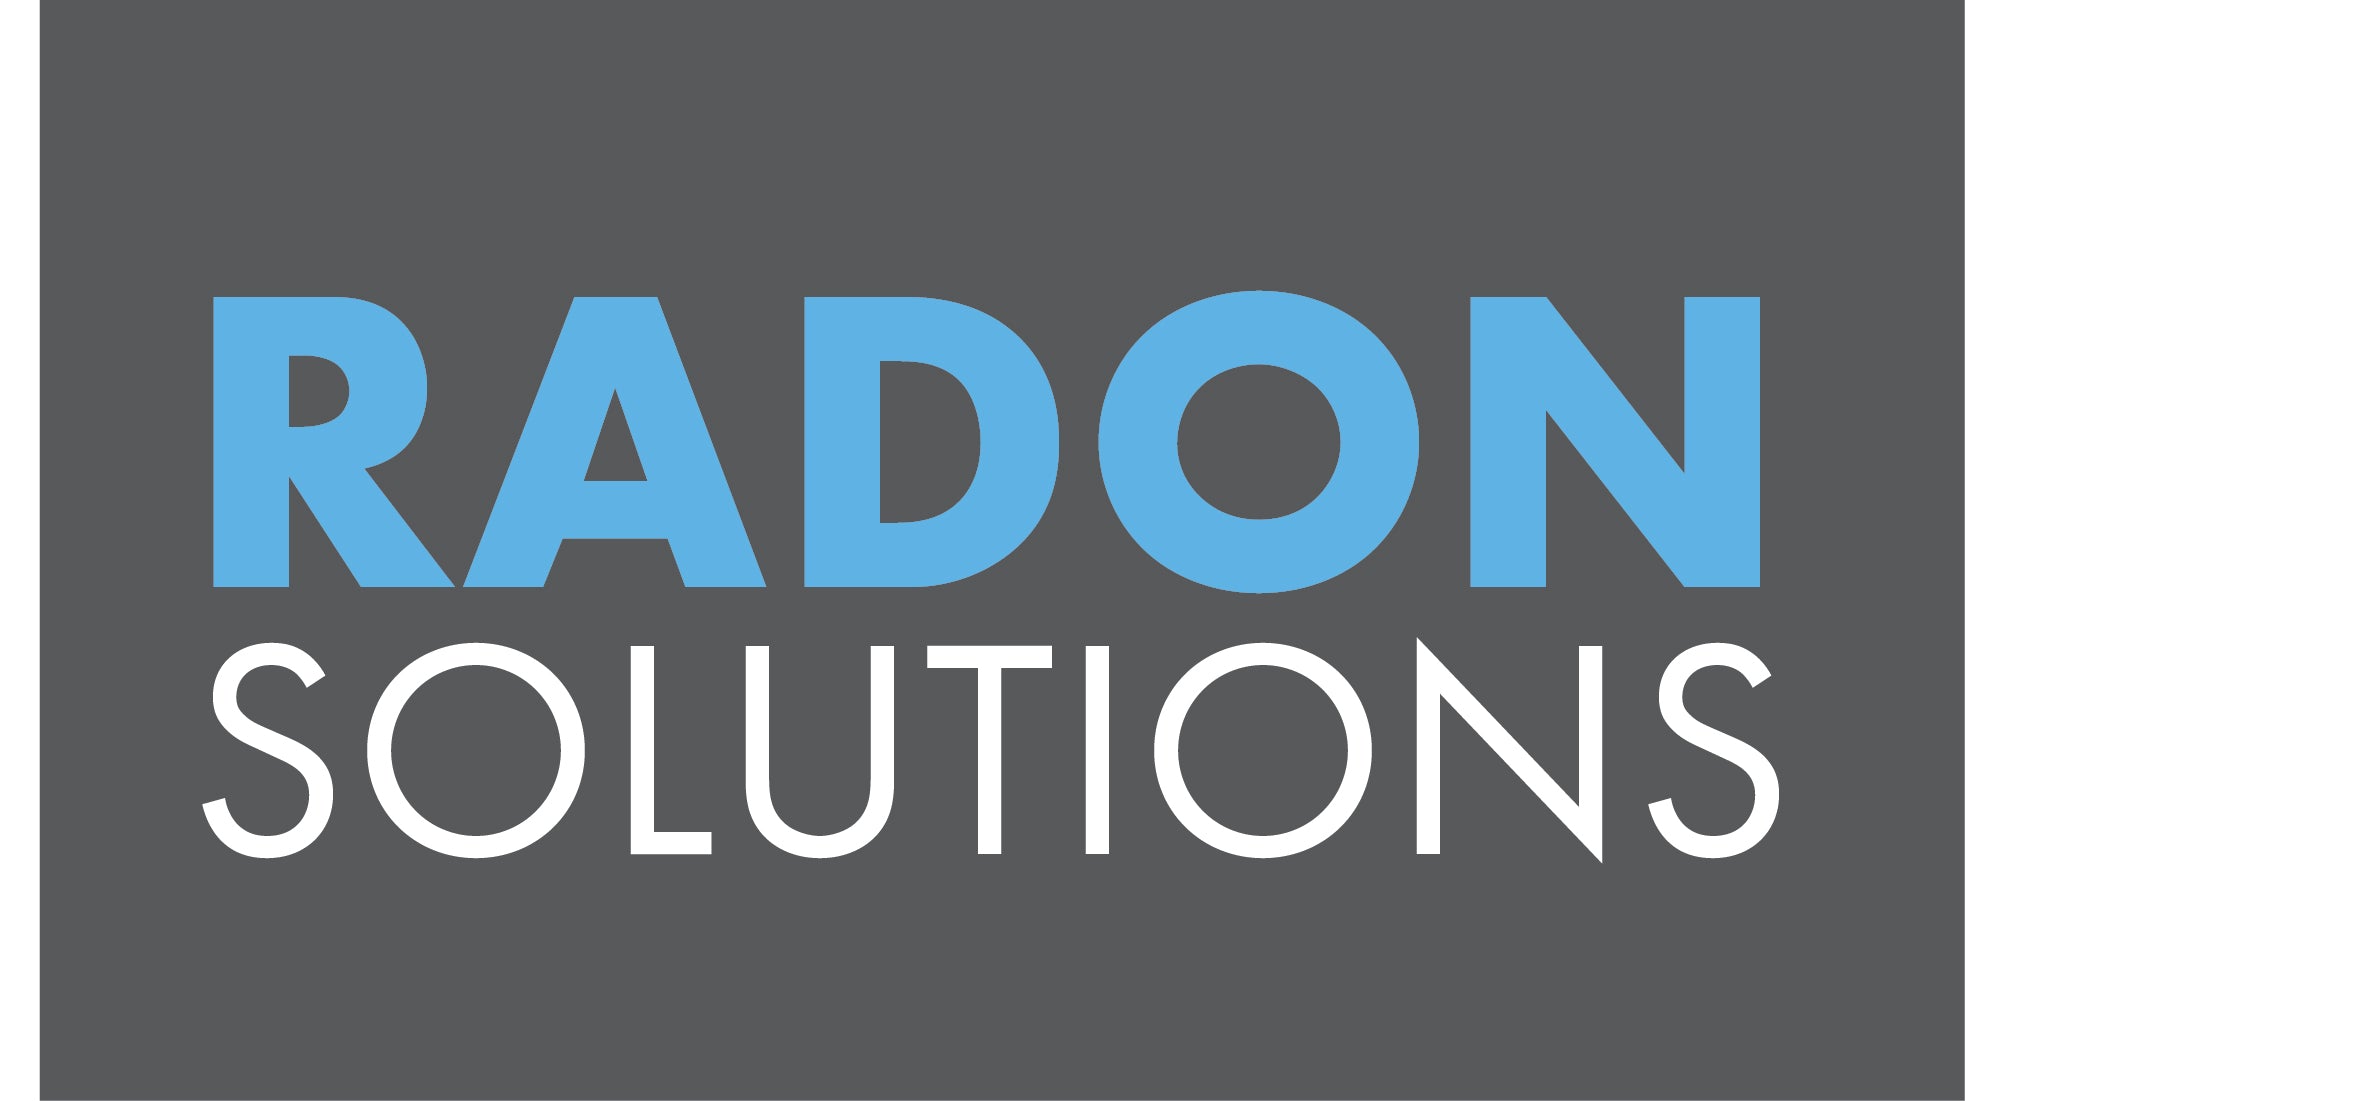 Radon Solutions Kansas, A division on Building Performance Co. Located in Salina Kansas and traveling anywhere from, Salina, McPherson, Lindsborg, Abilene, Ellsworth, Junction City, Newton, Hutchinson and traveling up to 8 hours away for commercial work.